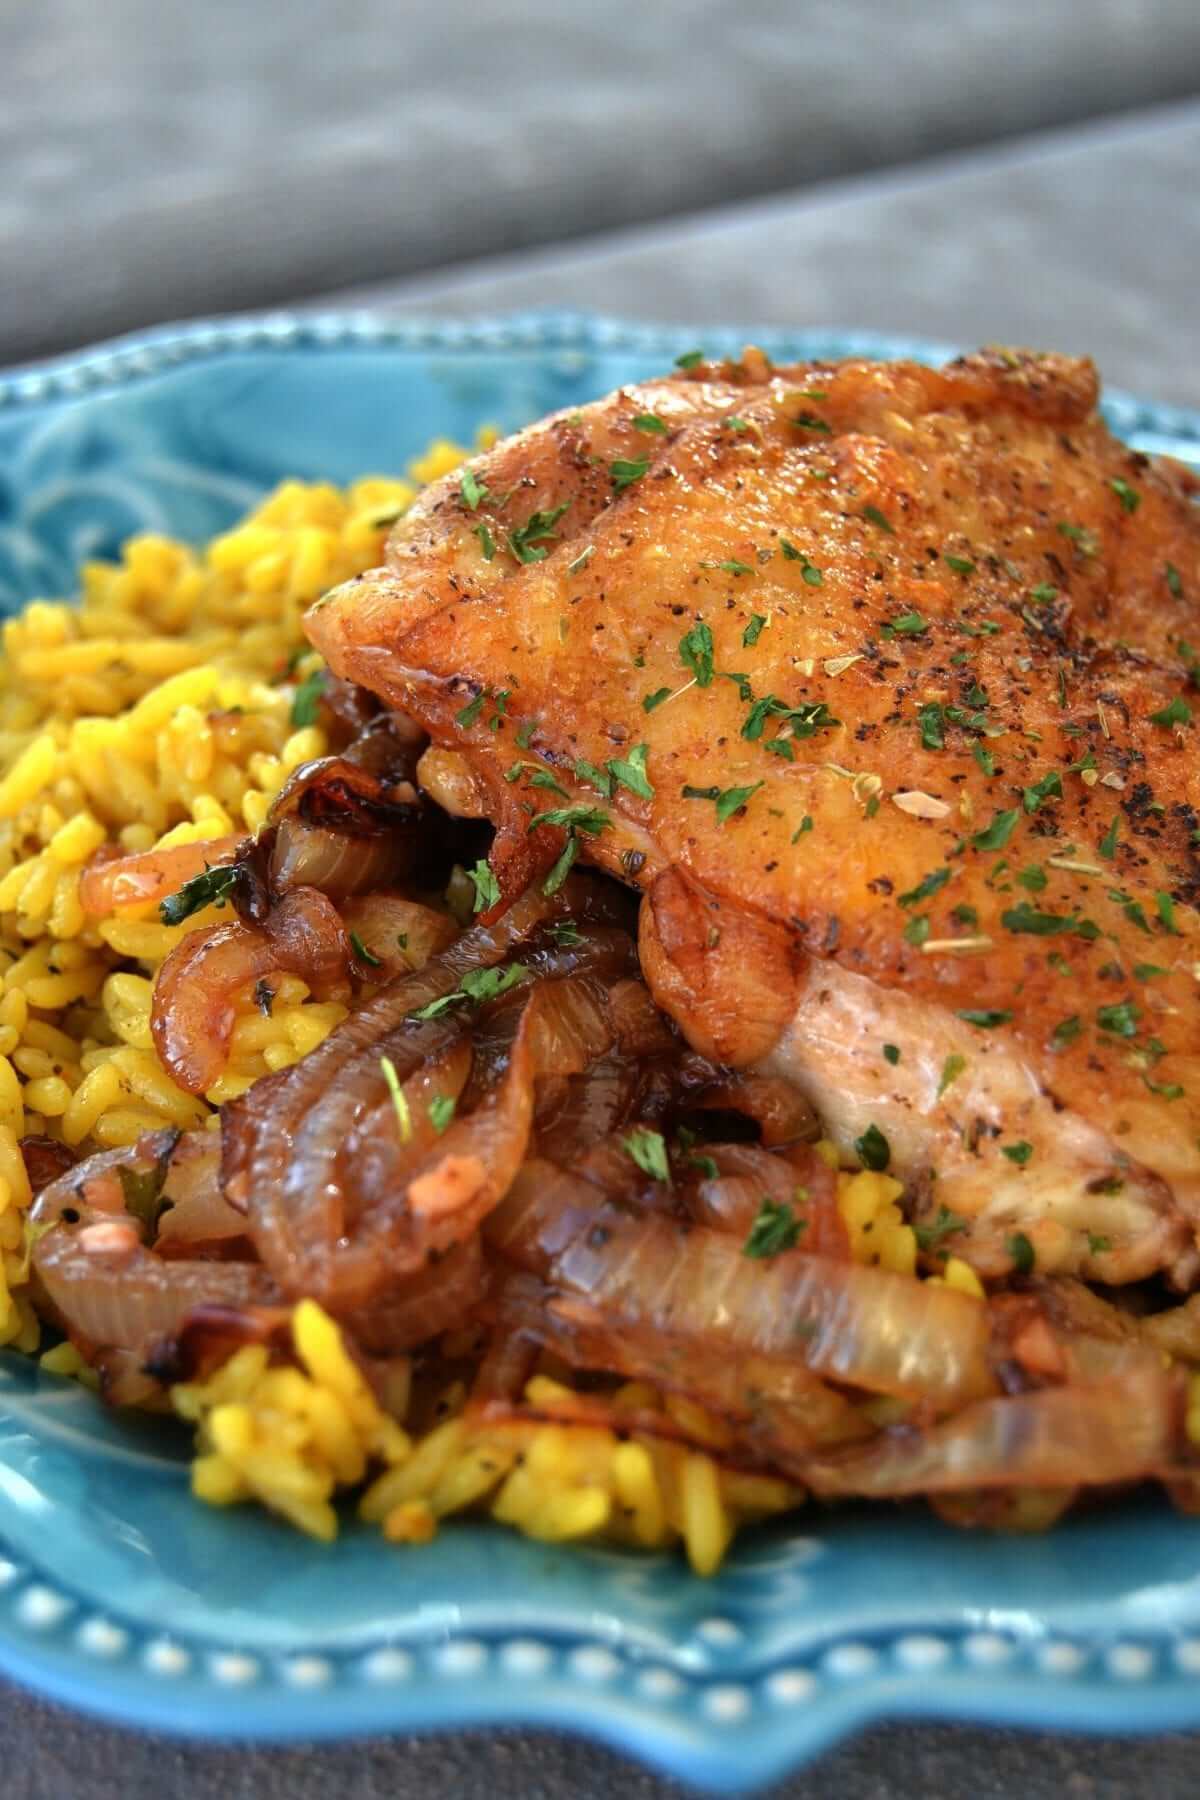 Roasted chicken with ready rice